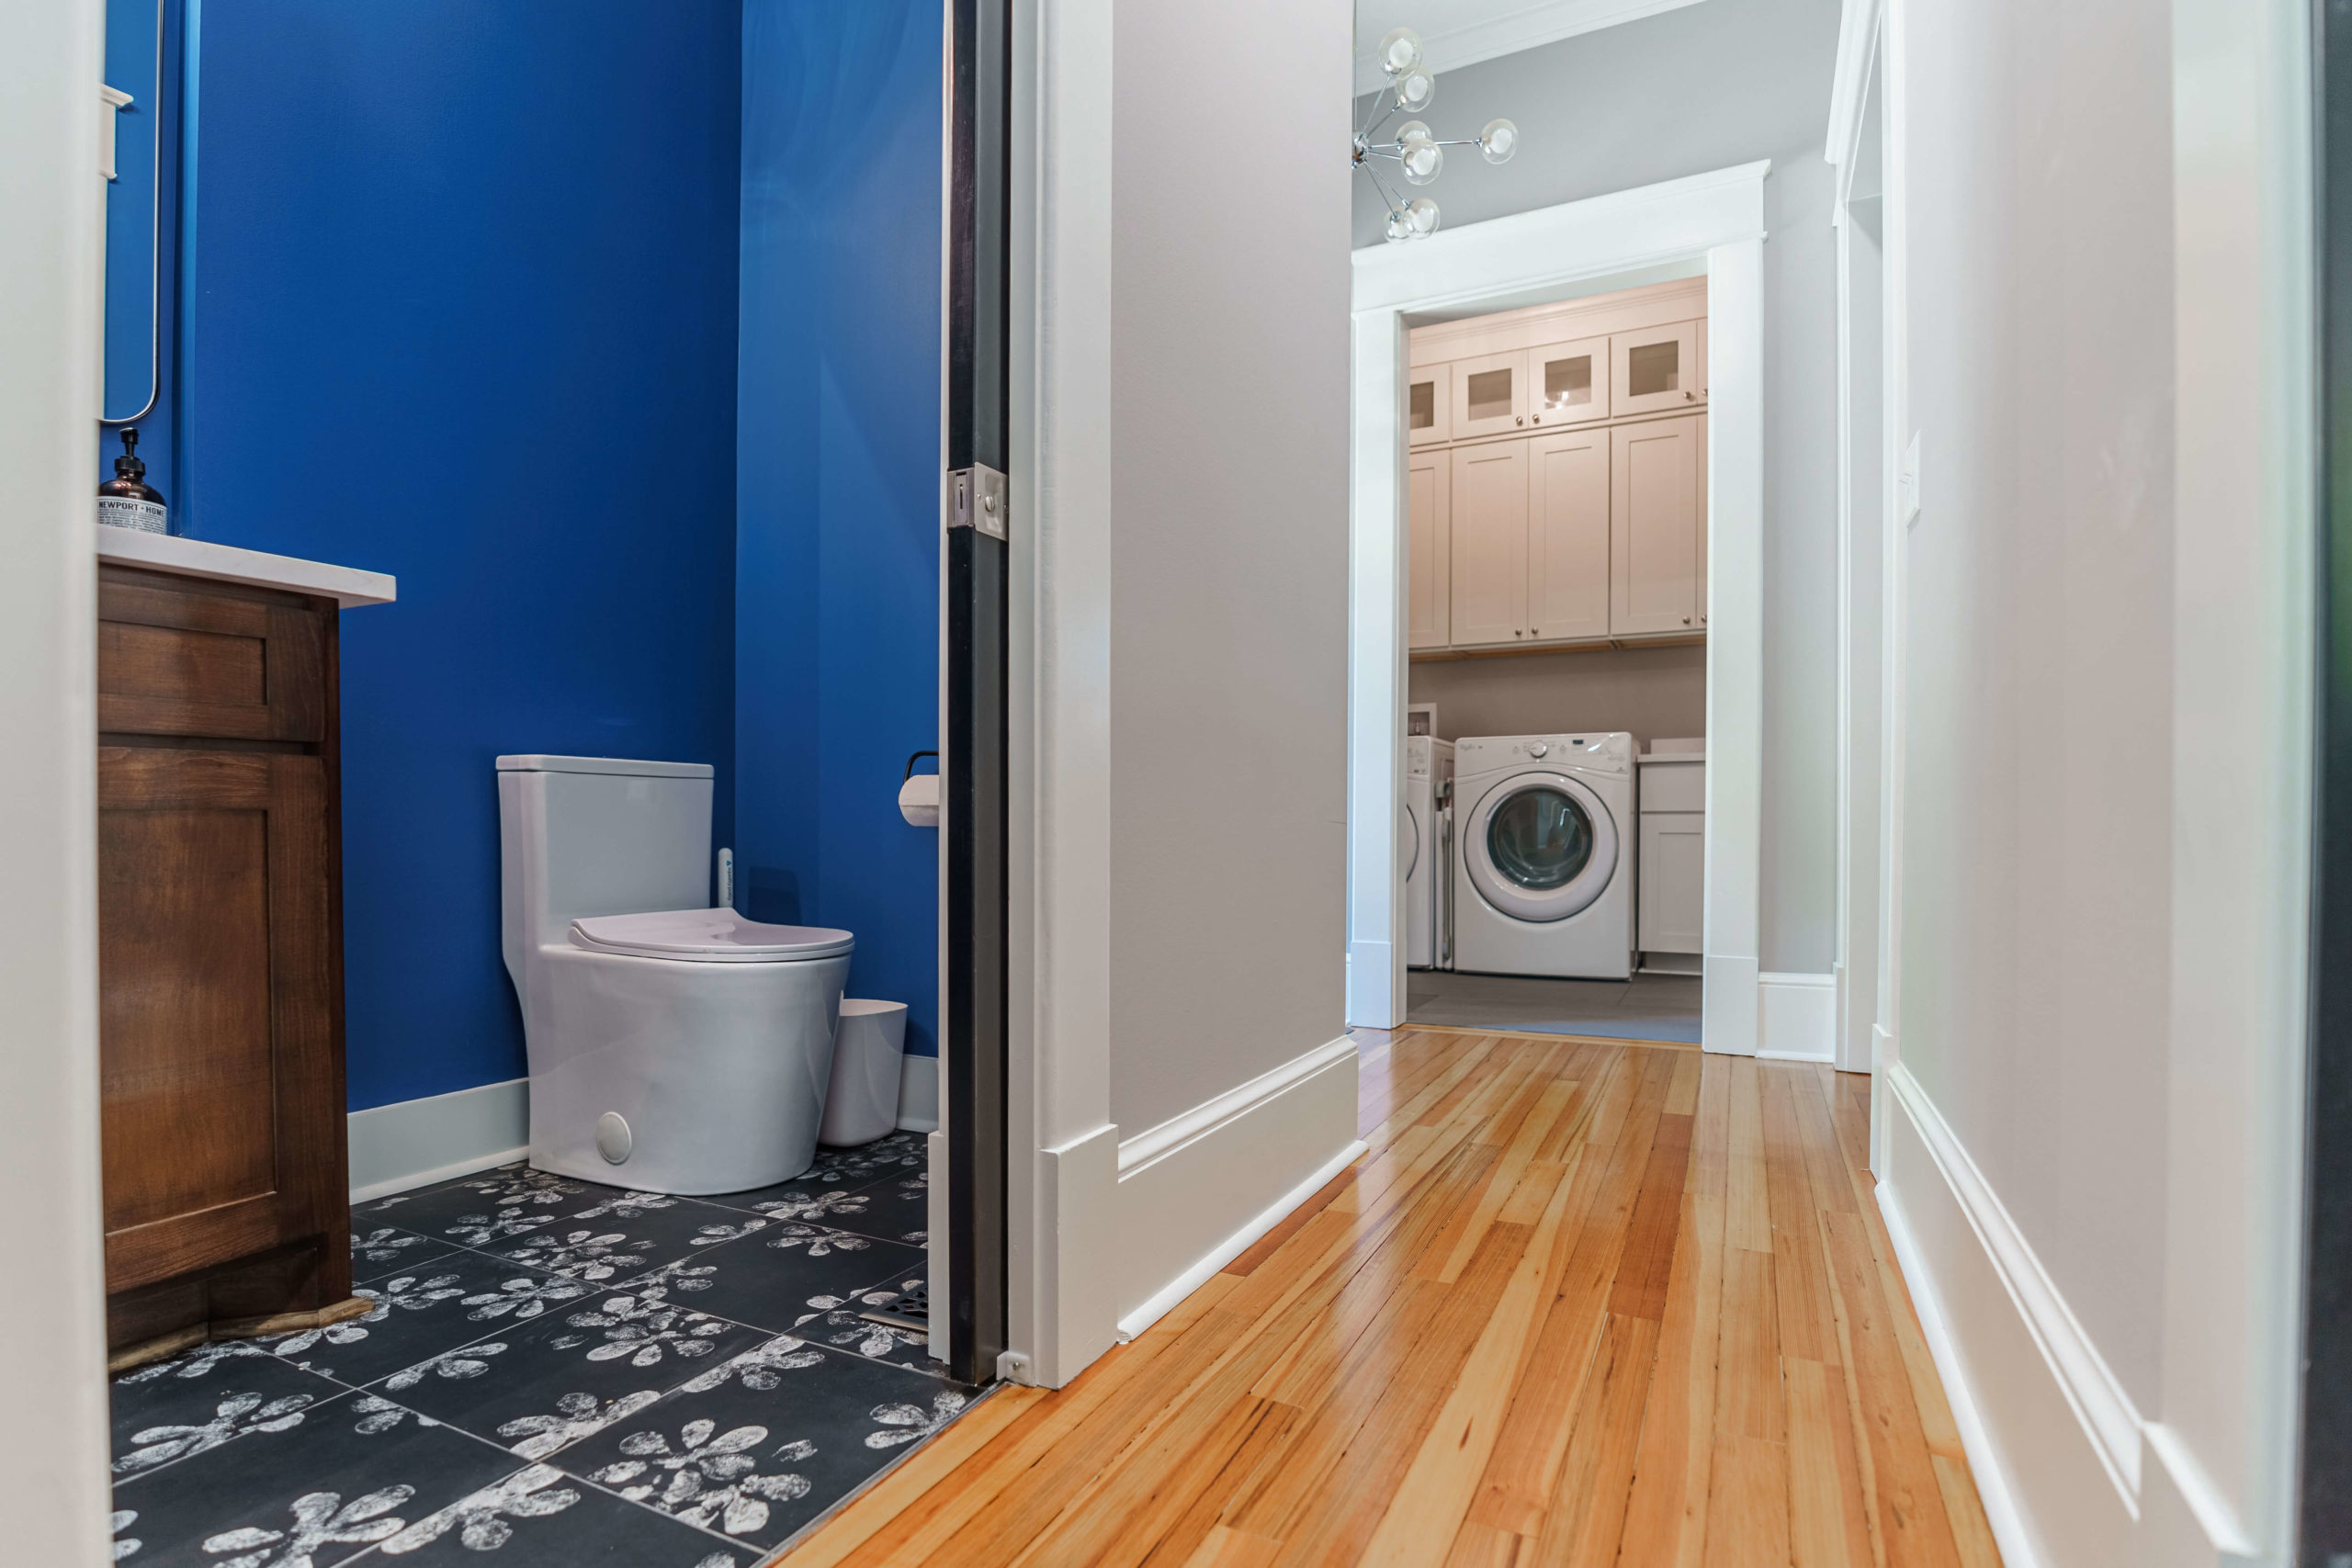 Wood floors in a hallway that leads the the laundry room and the half bath with blue walls and floral pattern tile